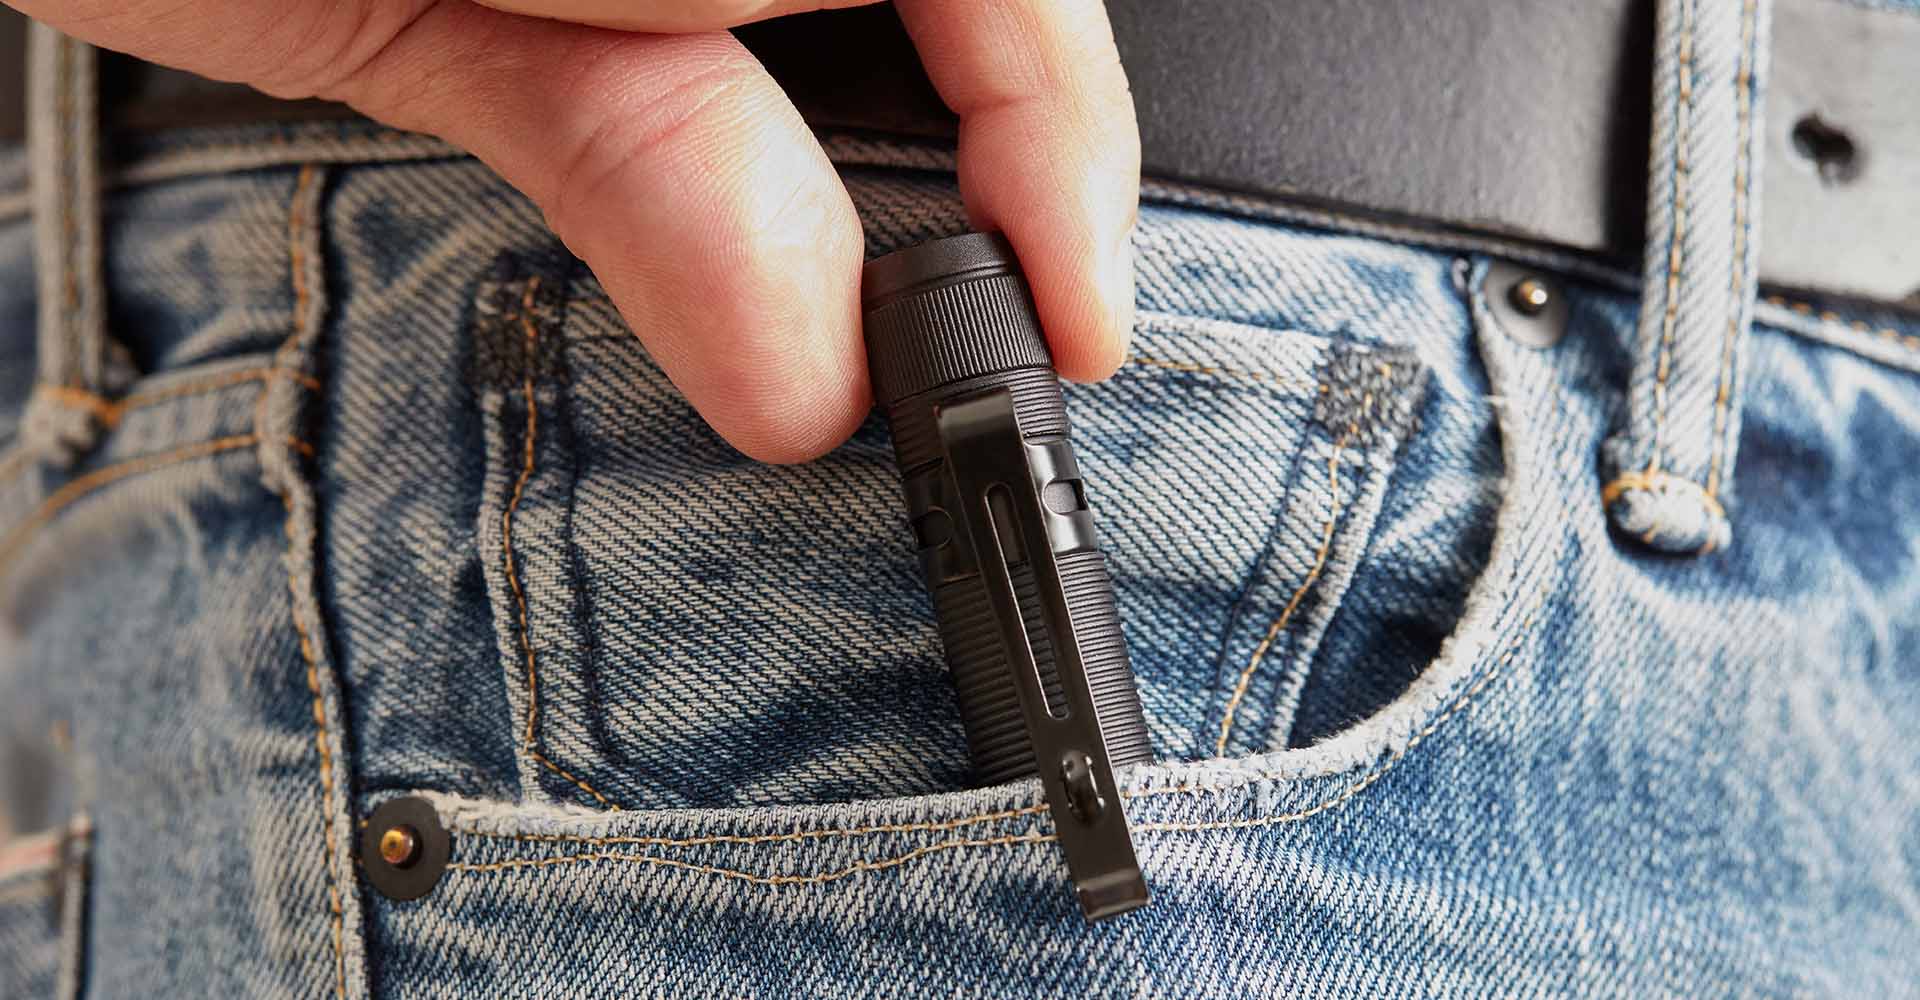 gp discovery - penlight torch in pocket